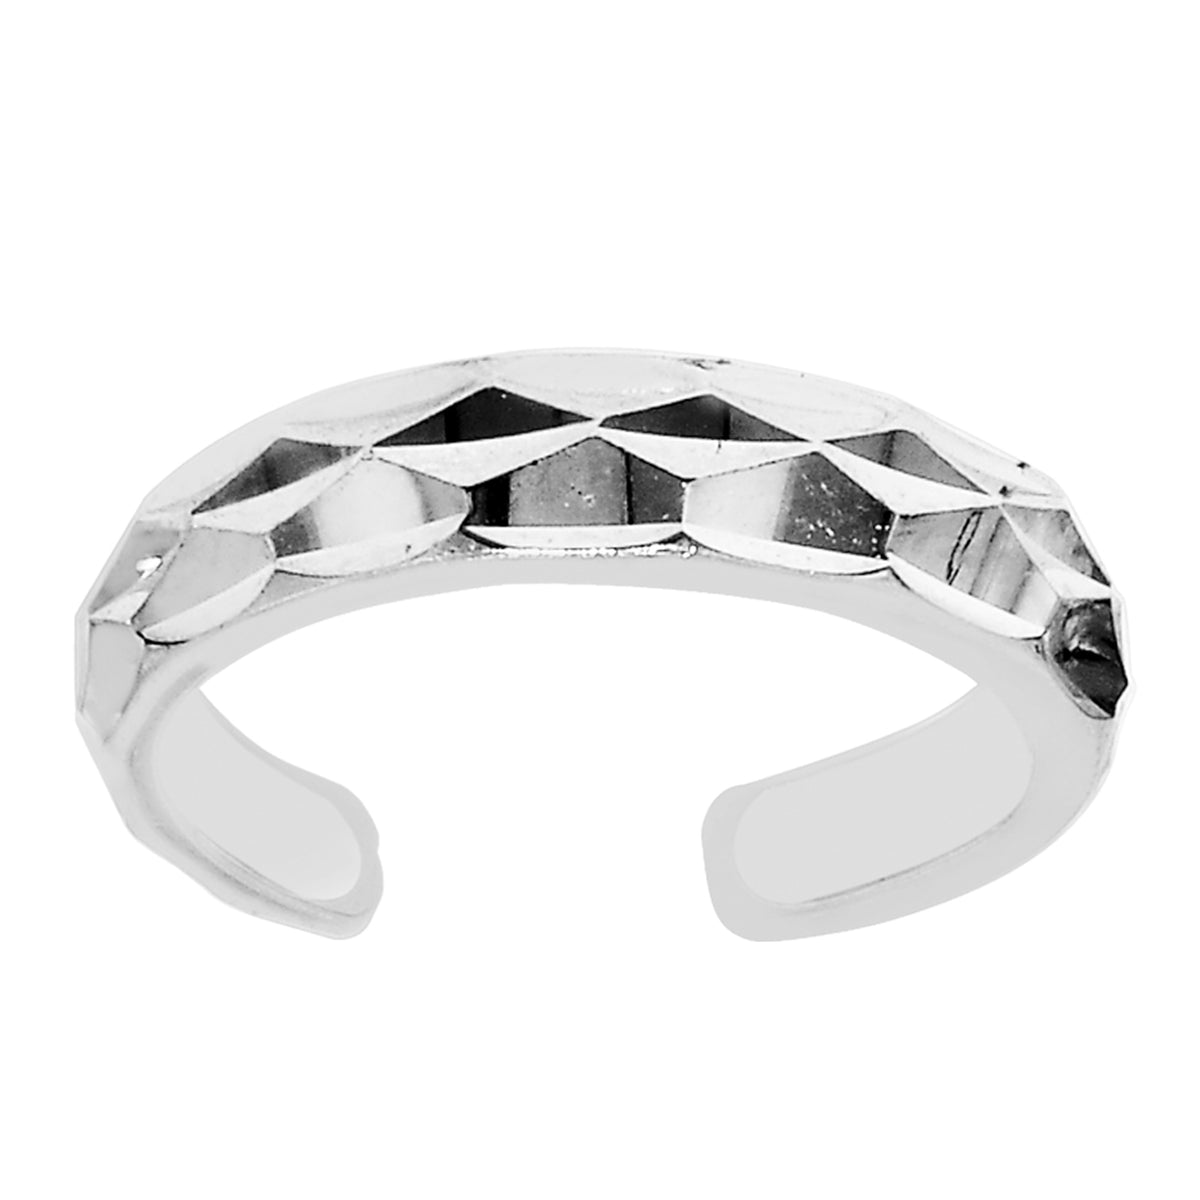 Sterling Silver Diamond Cut Cuff Style Adjustable Toe Ring fine designer jewelry for men and women